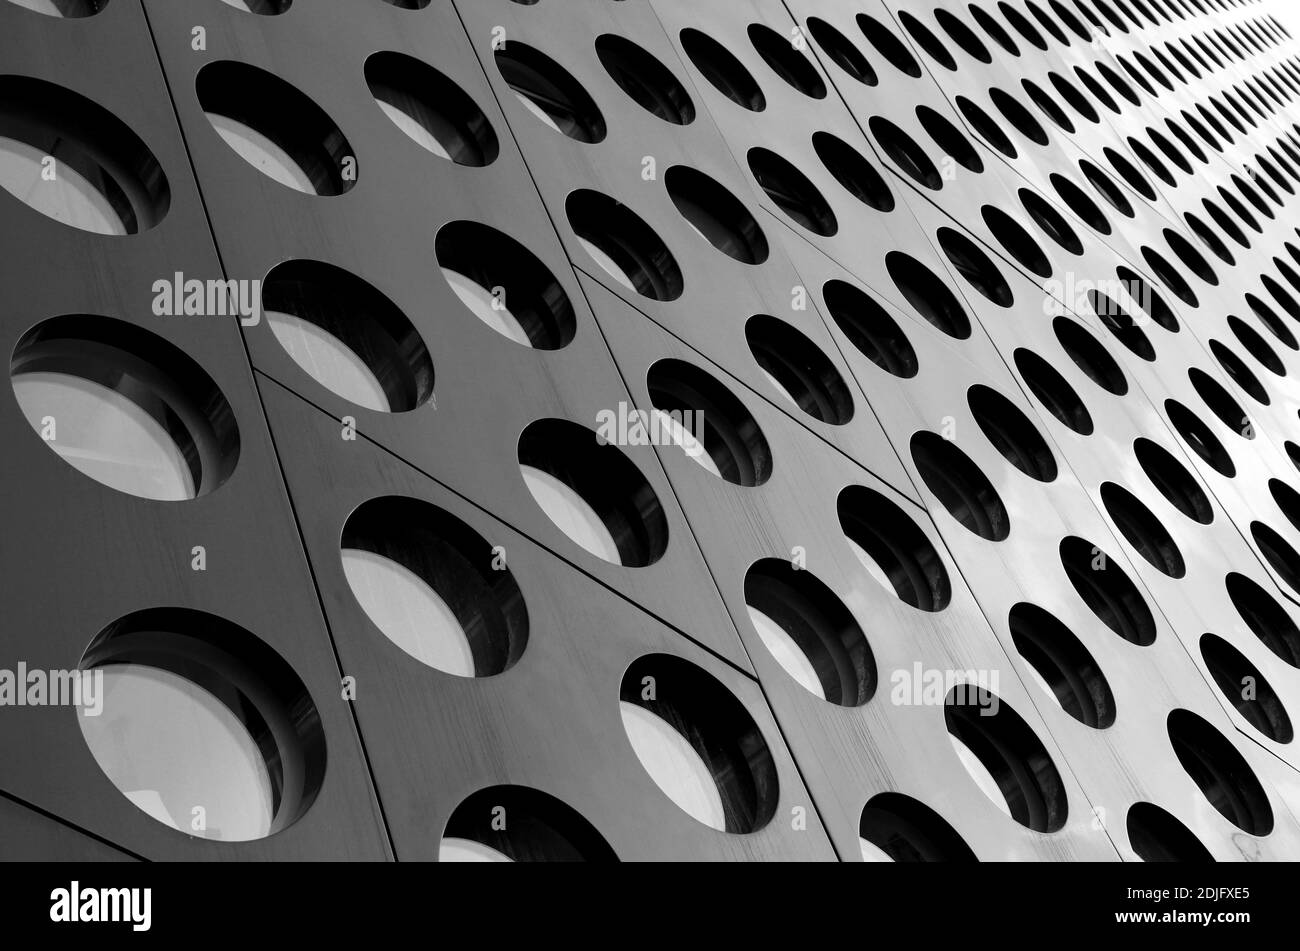 Black and white doted architecture abstract with perspective Stock Photo